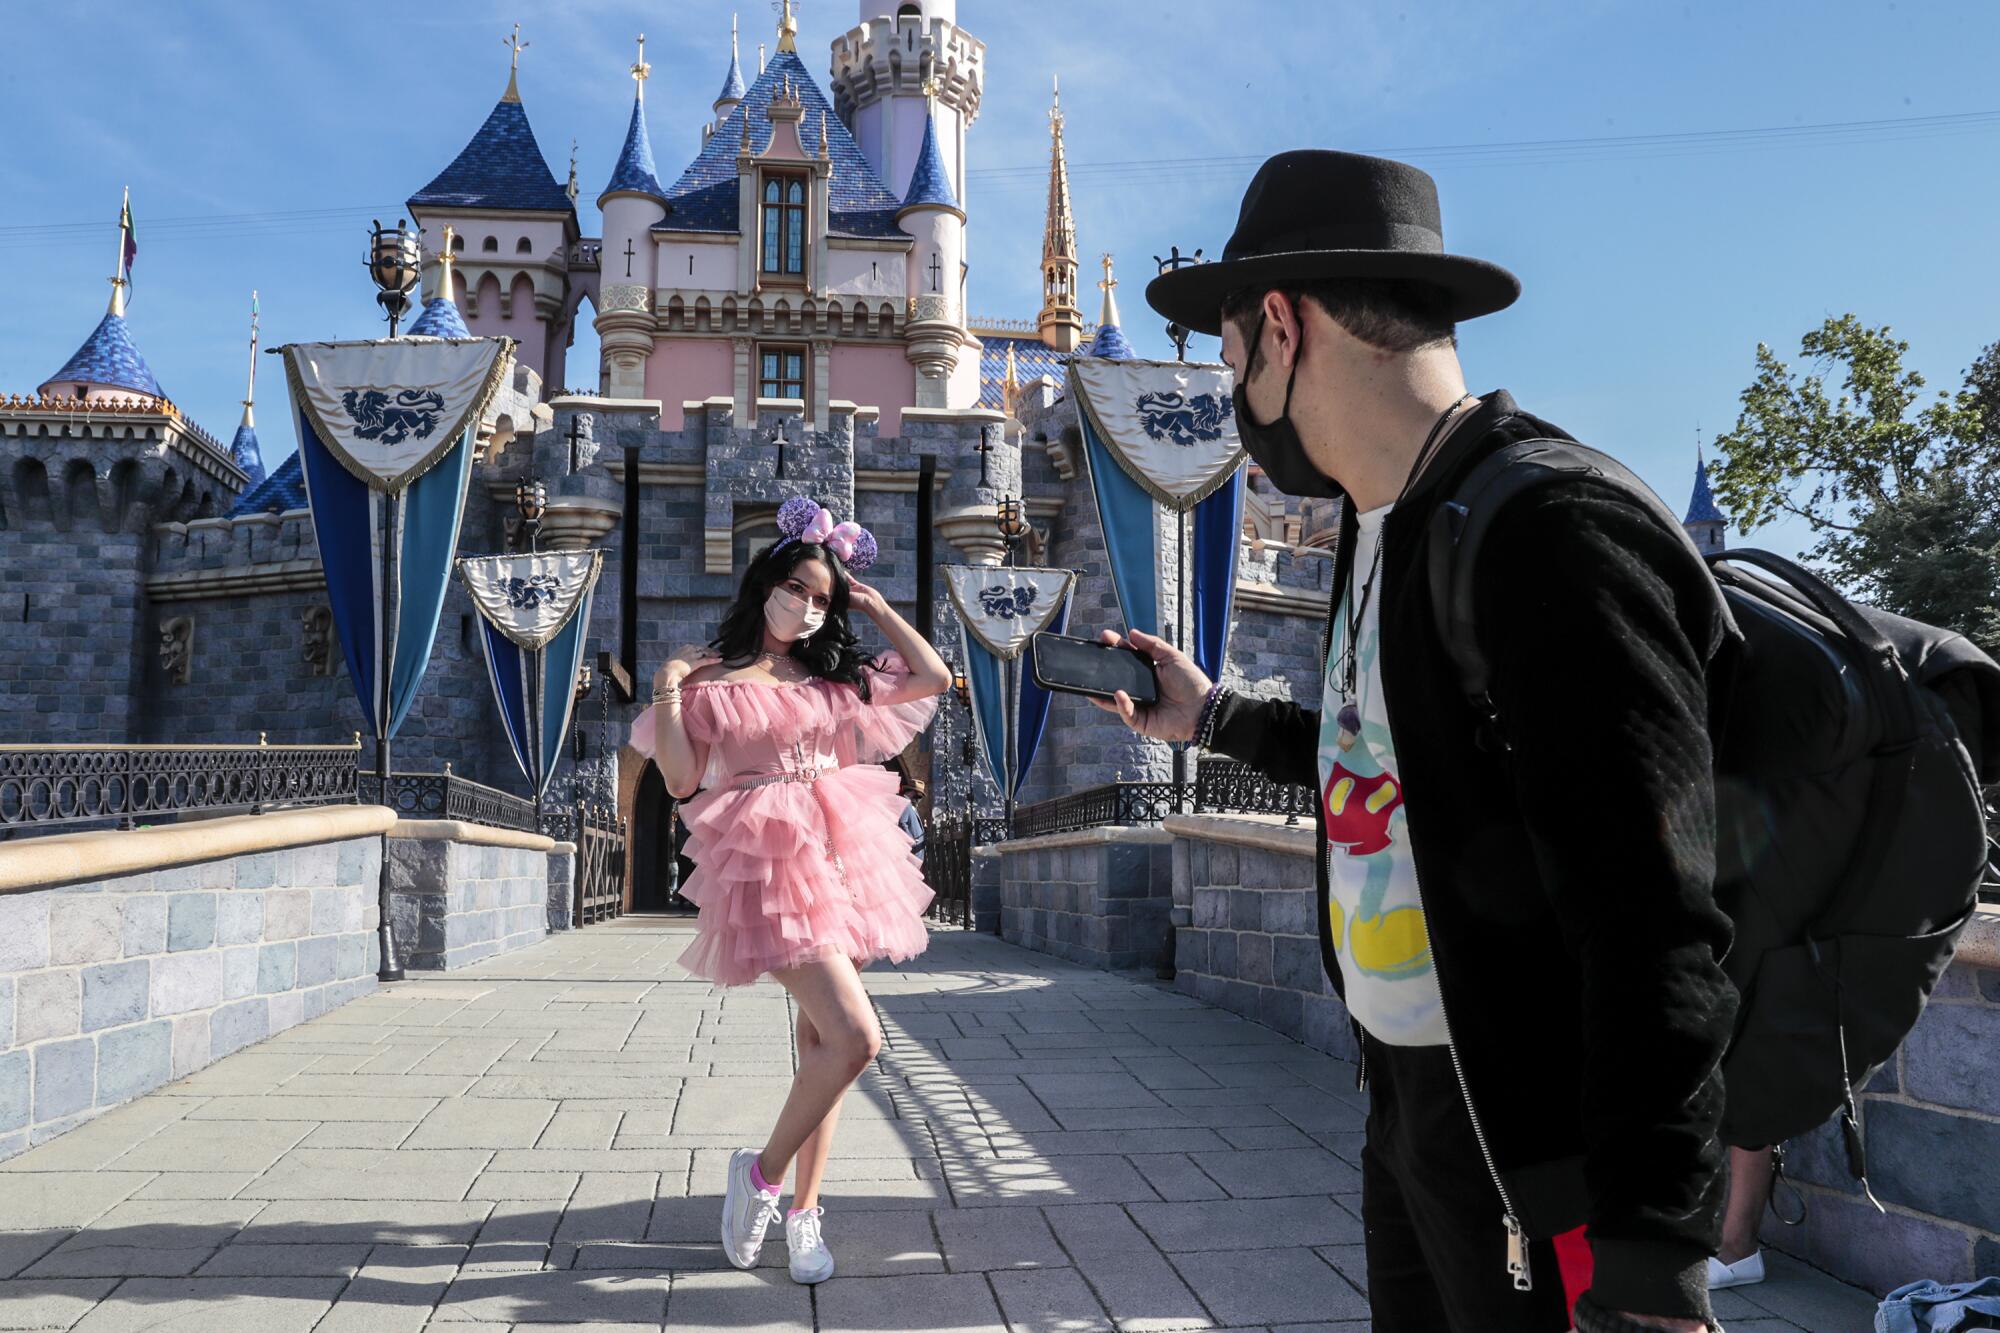 Minerva Mendez and Ahmed El take photos in front of Sleeping Beauty's Castle inside Disneyland.